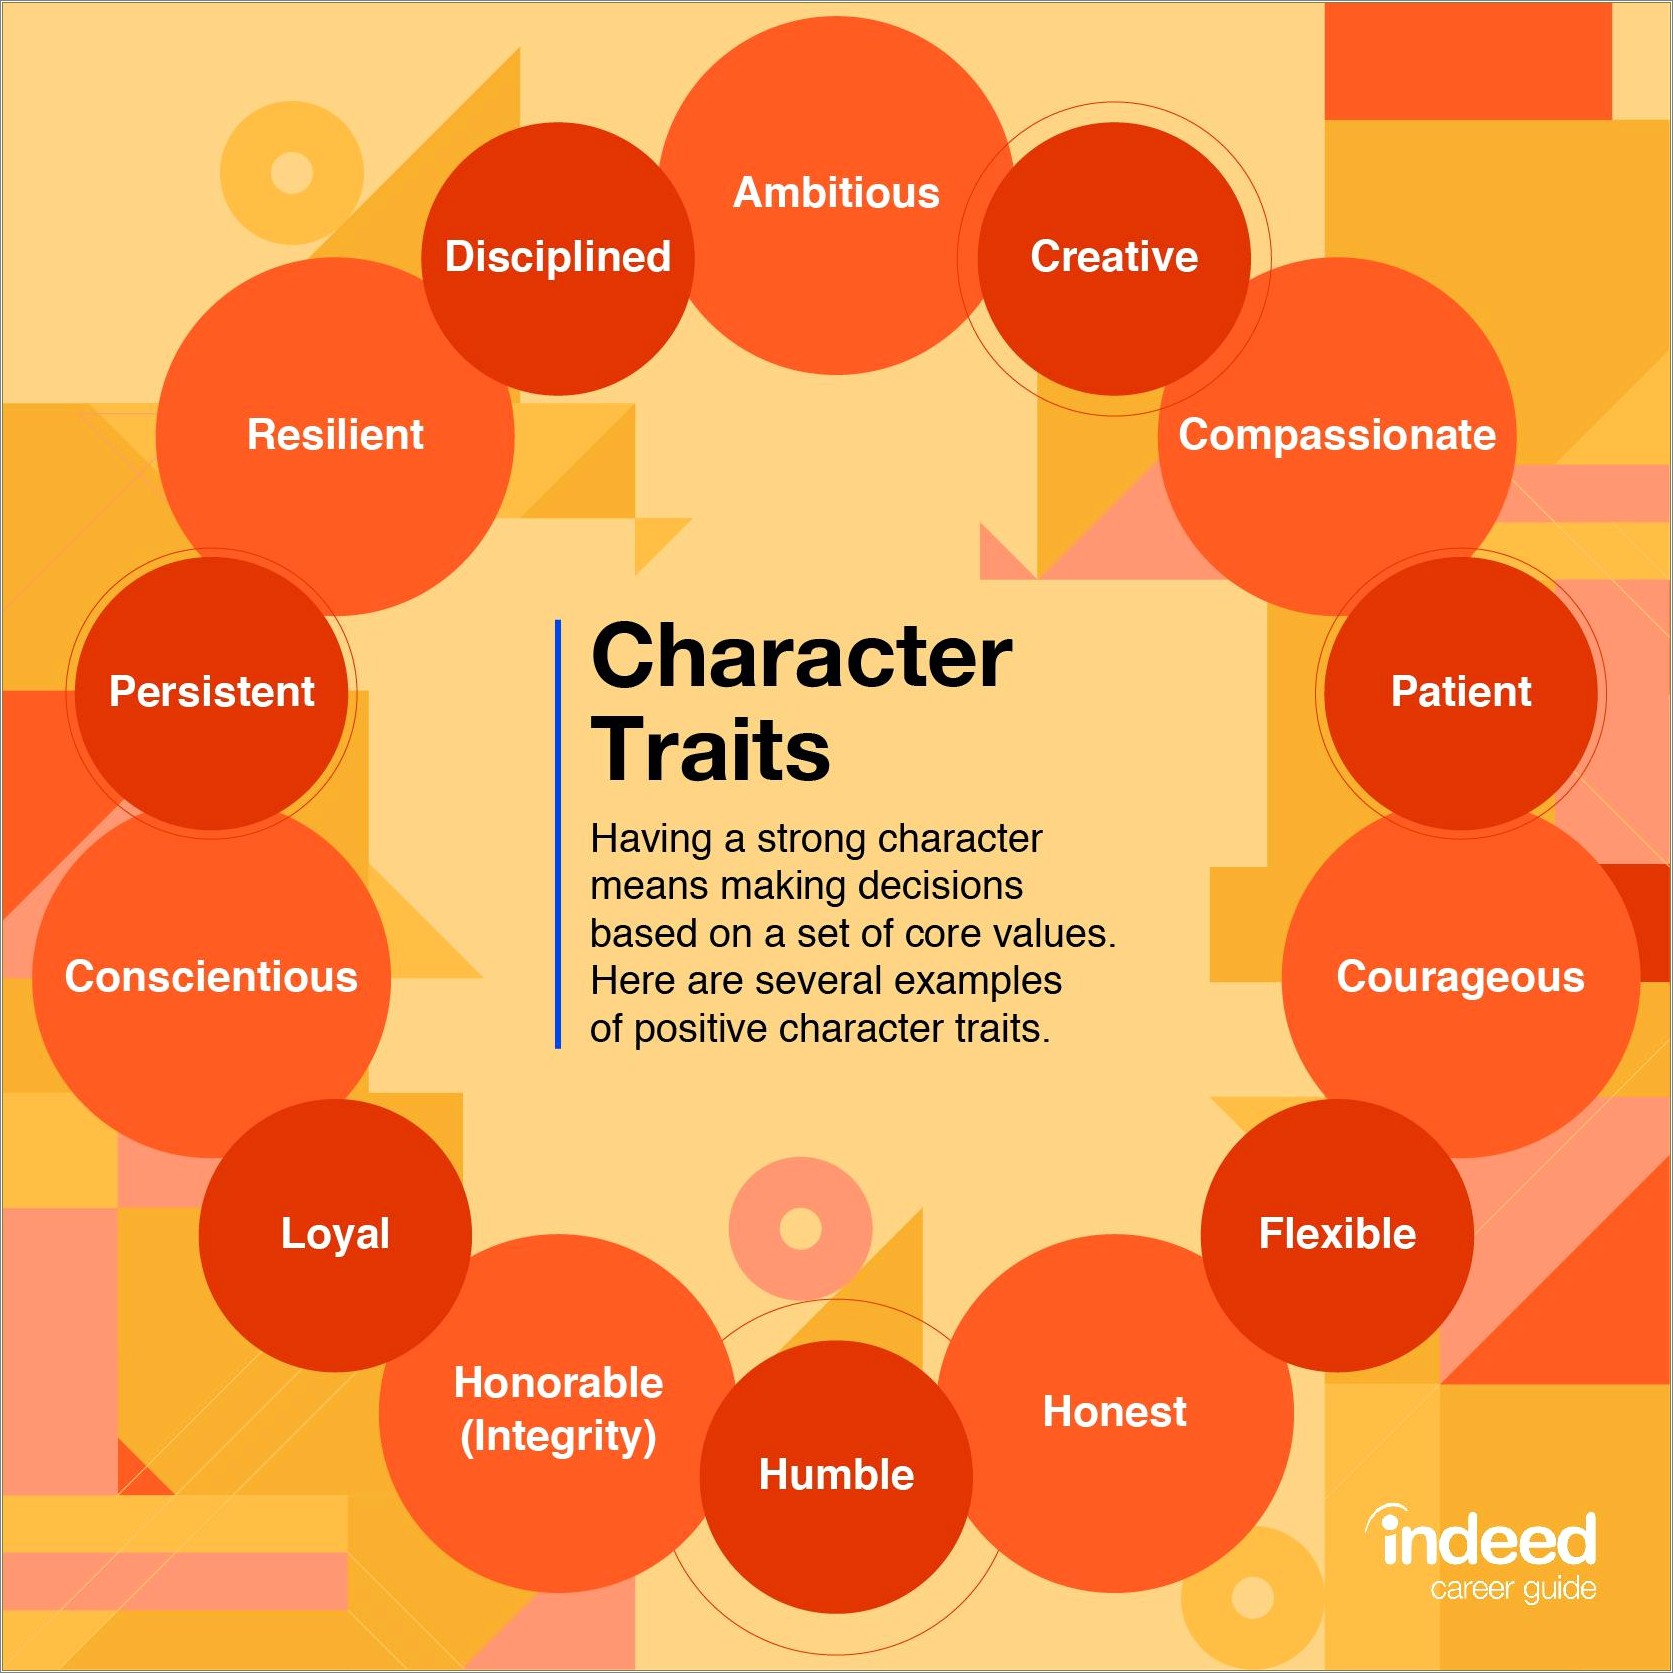 Examples Of Personal Traits For Resume